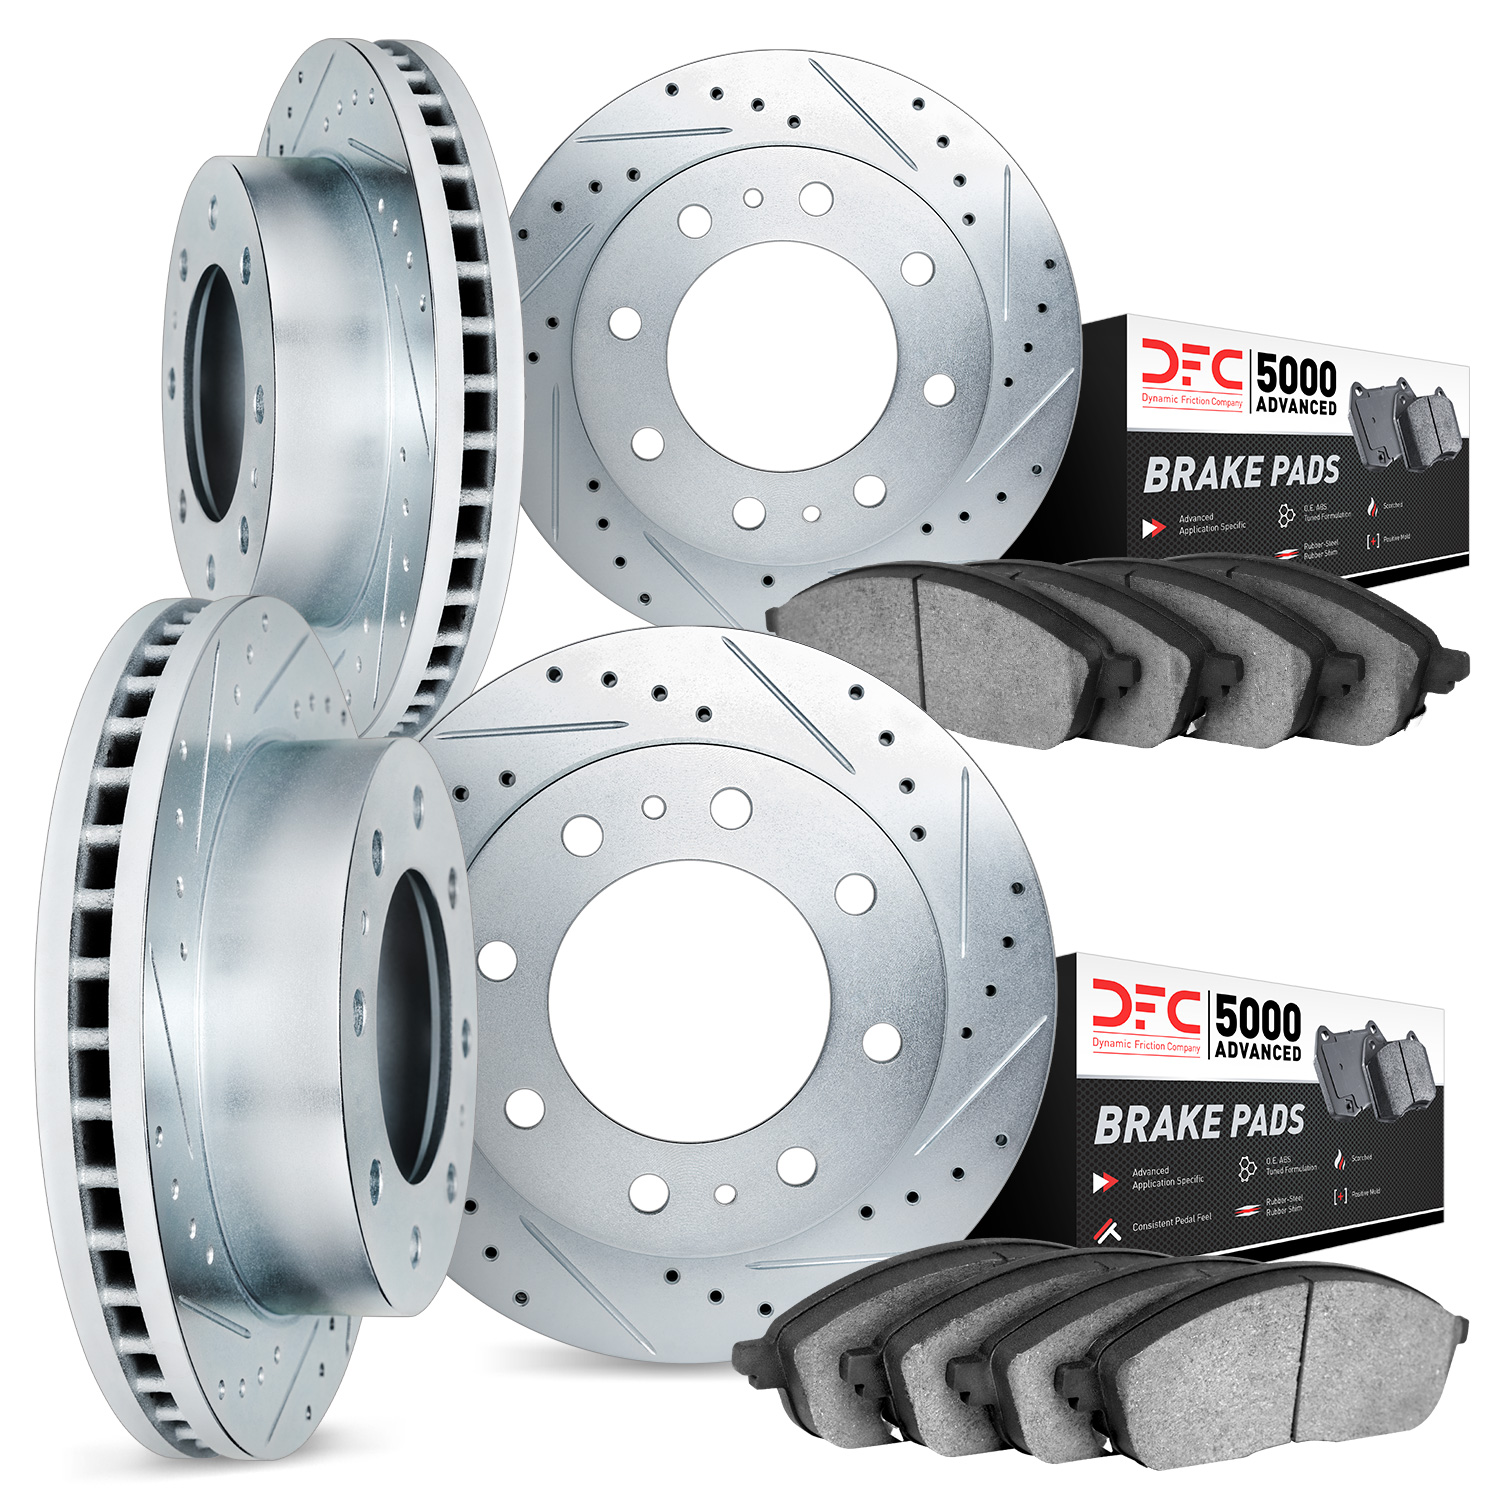 7504-48043 Drilled/Slotted Brake Rotors w/5000 Advanced Brake Pads Kit [Silver], 2018-2020 GM, Position: Front and Rear